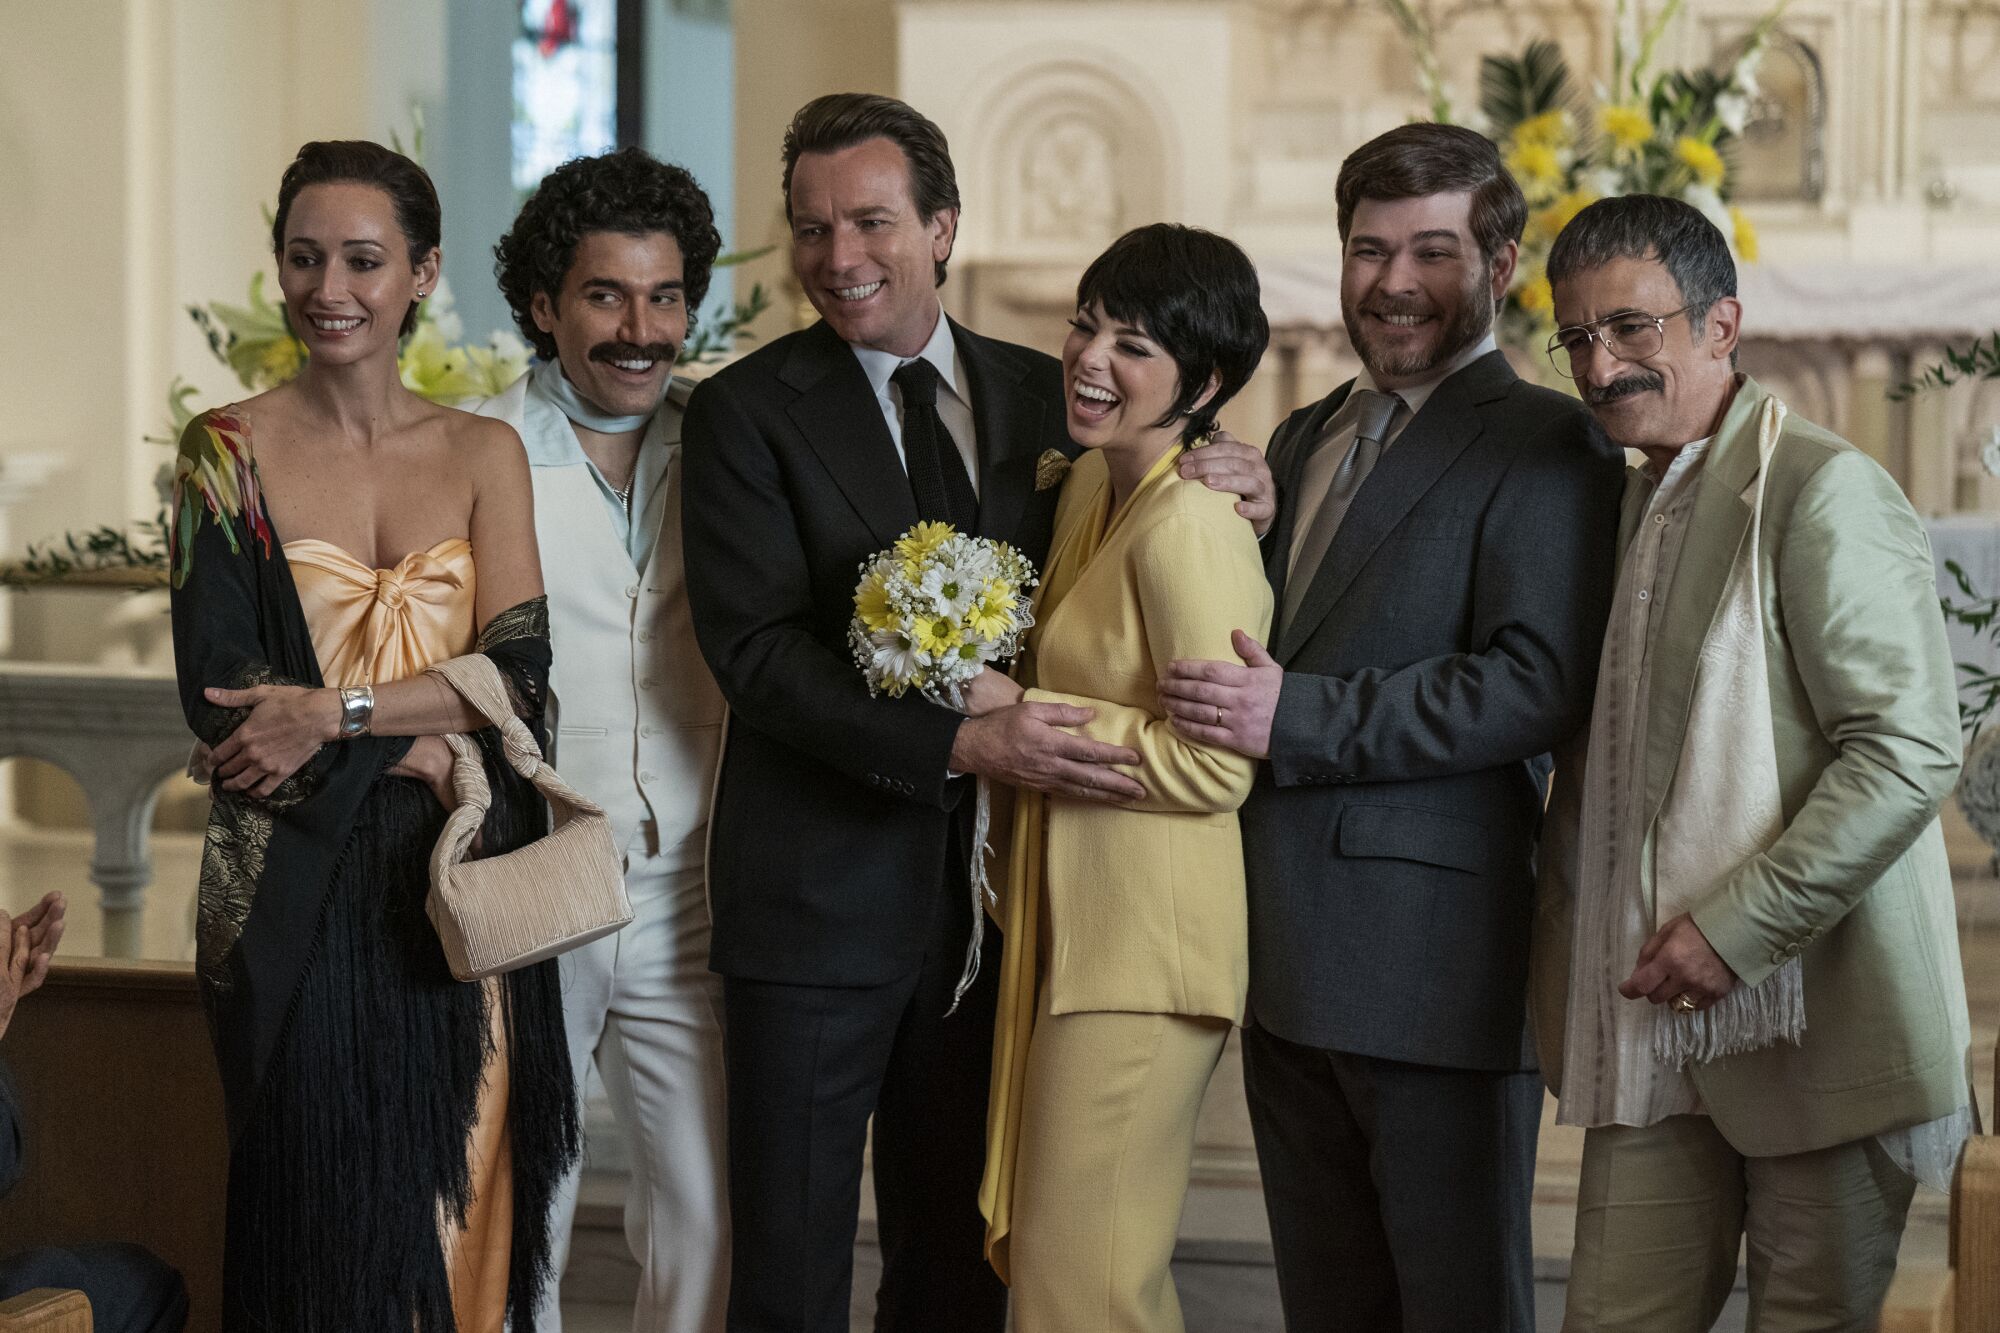 A scene from "Halston" shows Liza Minnelli and her wedding party smiling and laughing in the 1970s.